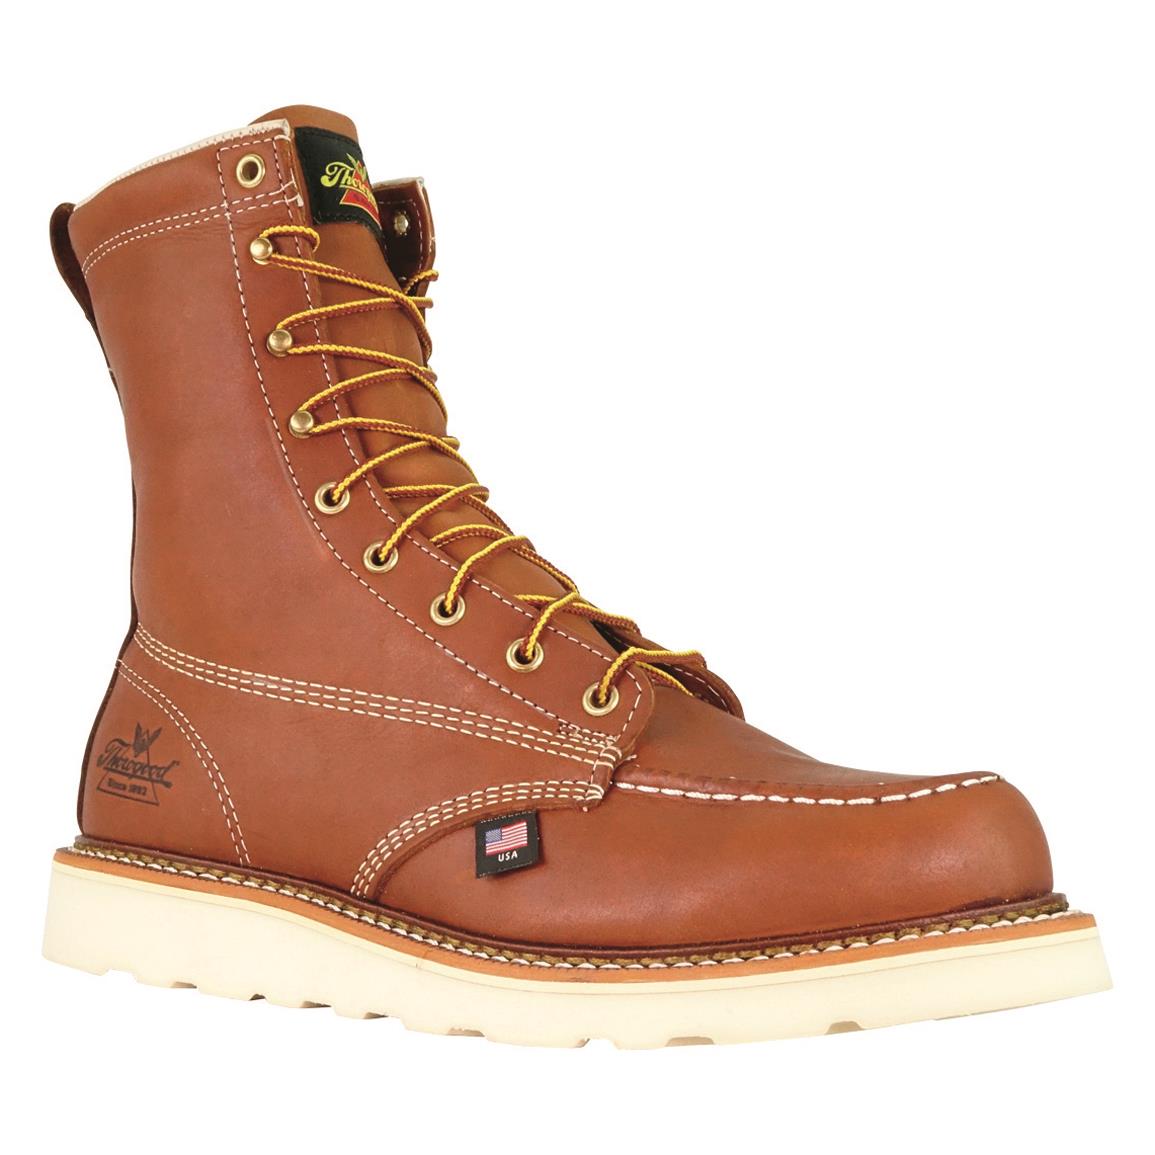 Oil-tanned, full-grain Tobacco leather uppers, Tobacco